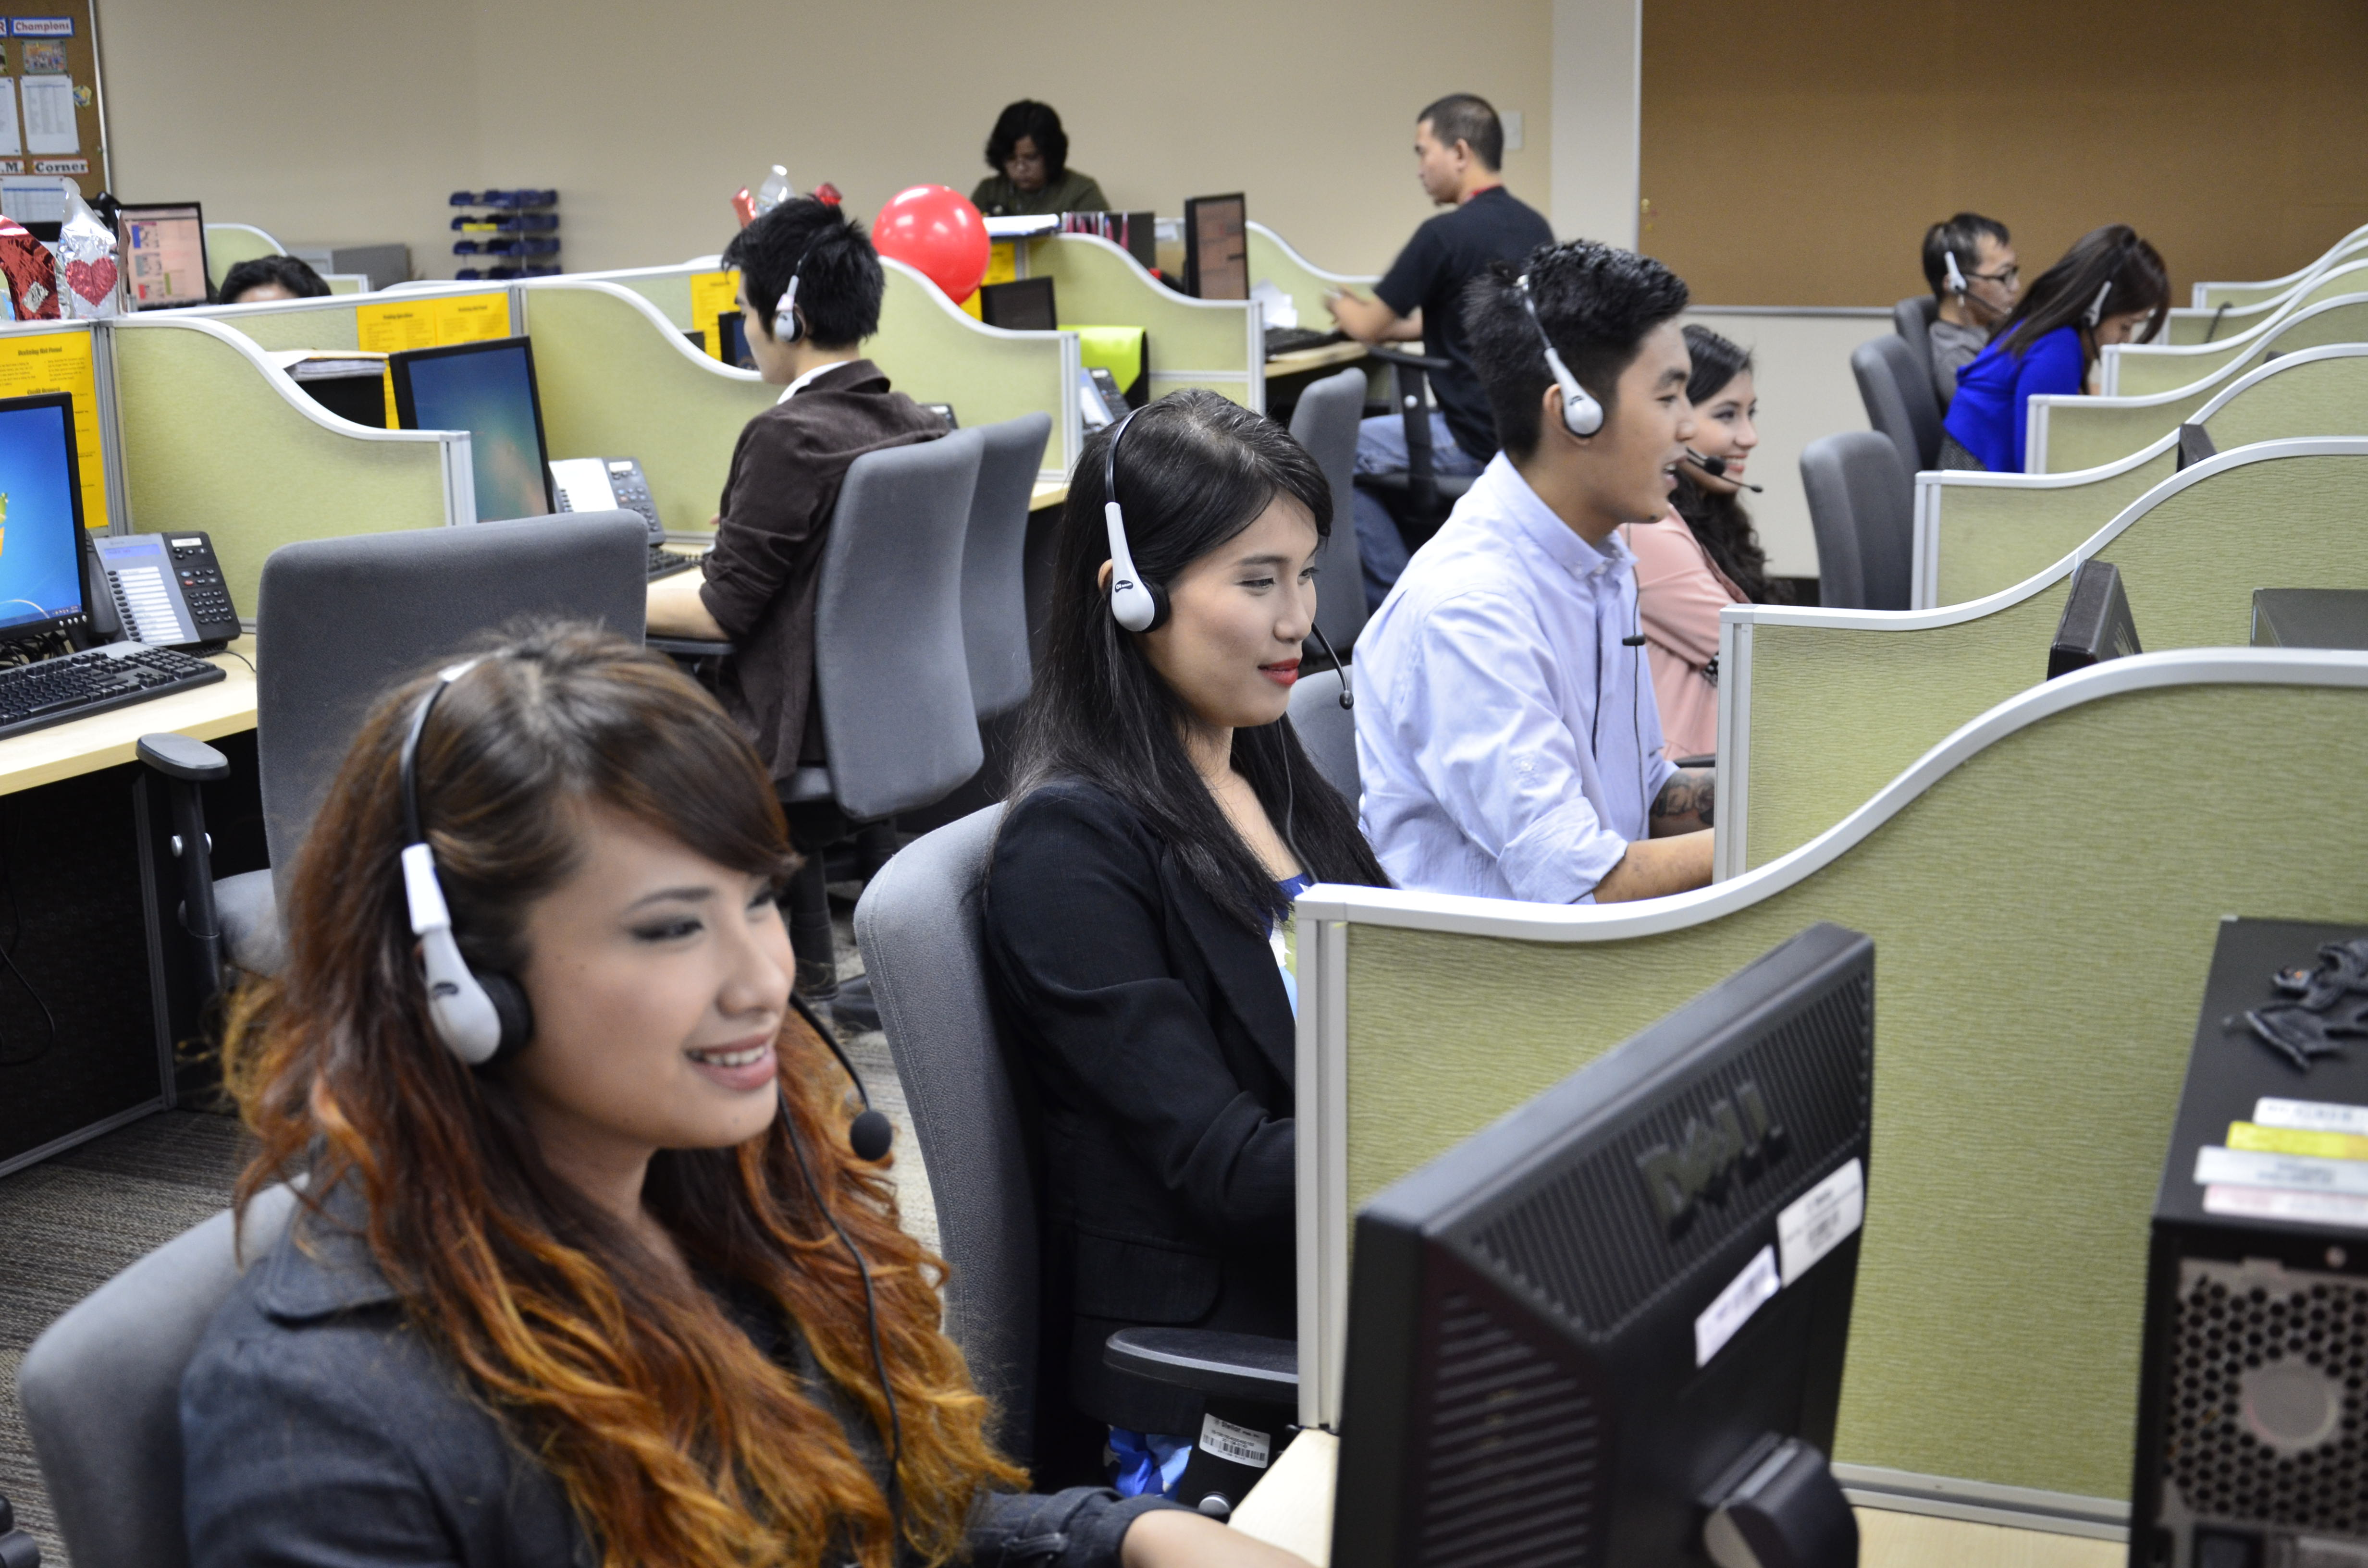 call center agent duties and responsibilities